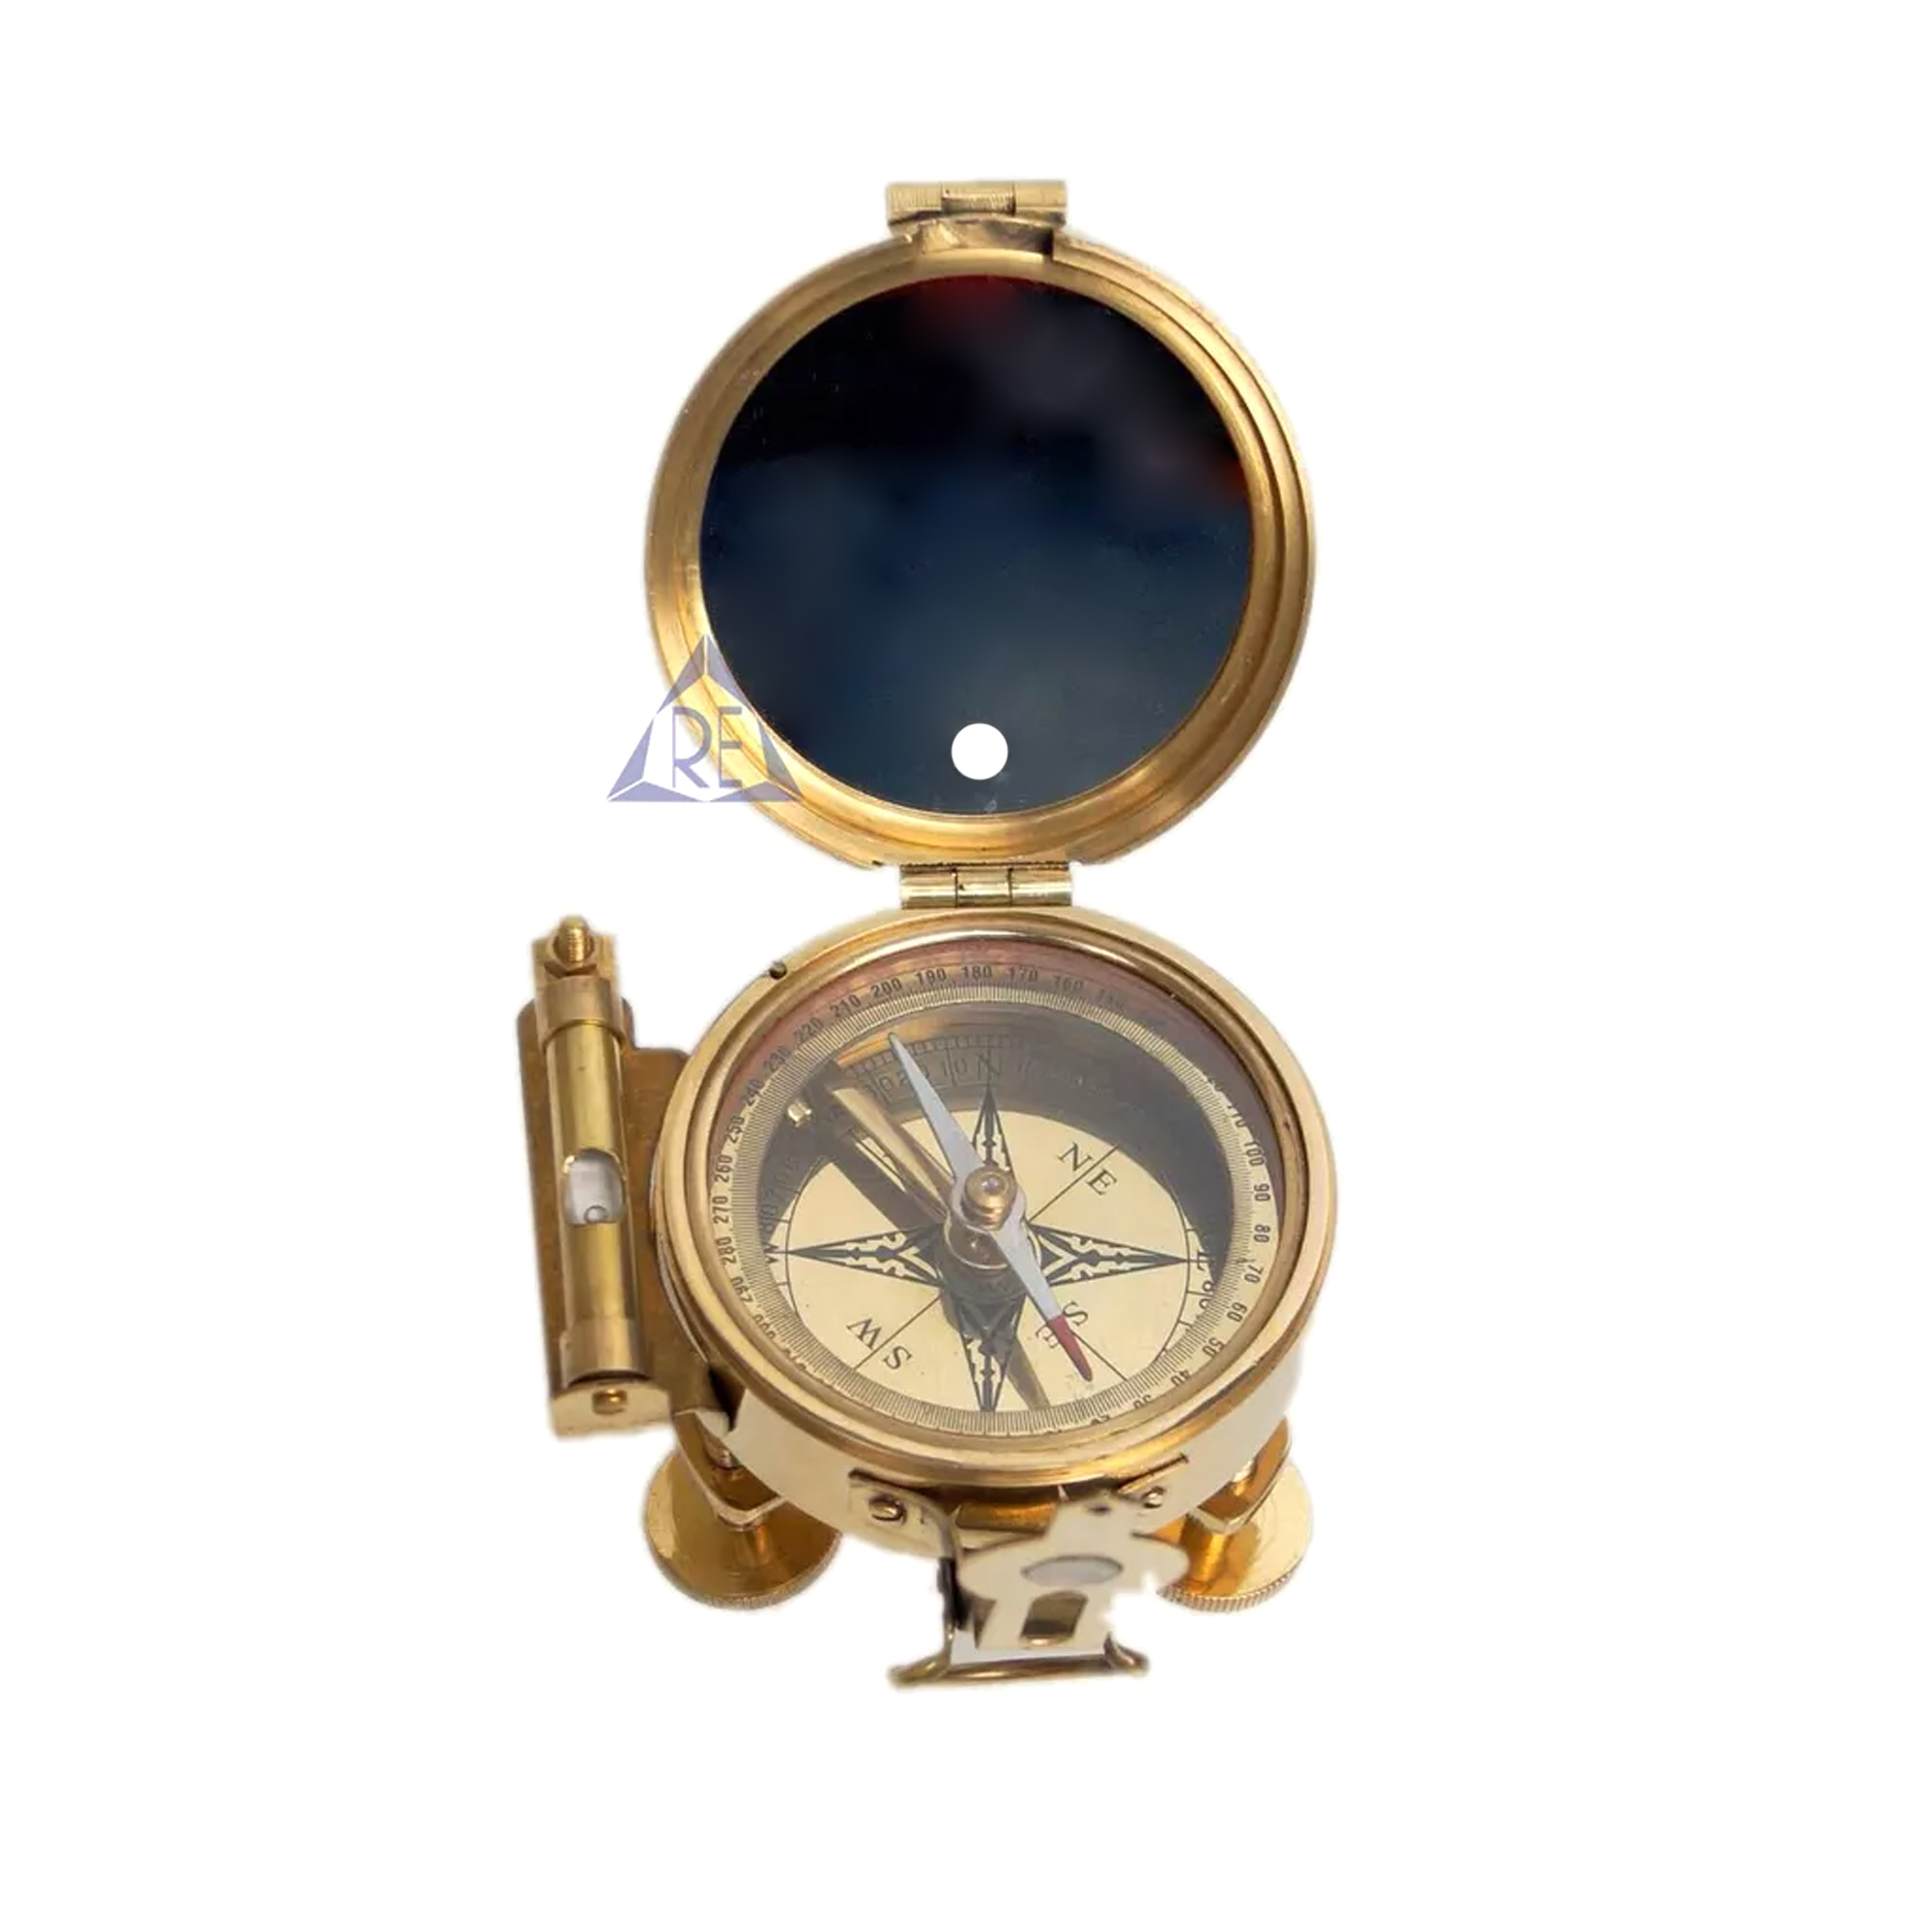 Solid brass brunton compass with stand handmade maritime vintage Christmas gift 3 inch nautical brunton Camping Hiking Compass